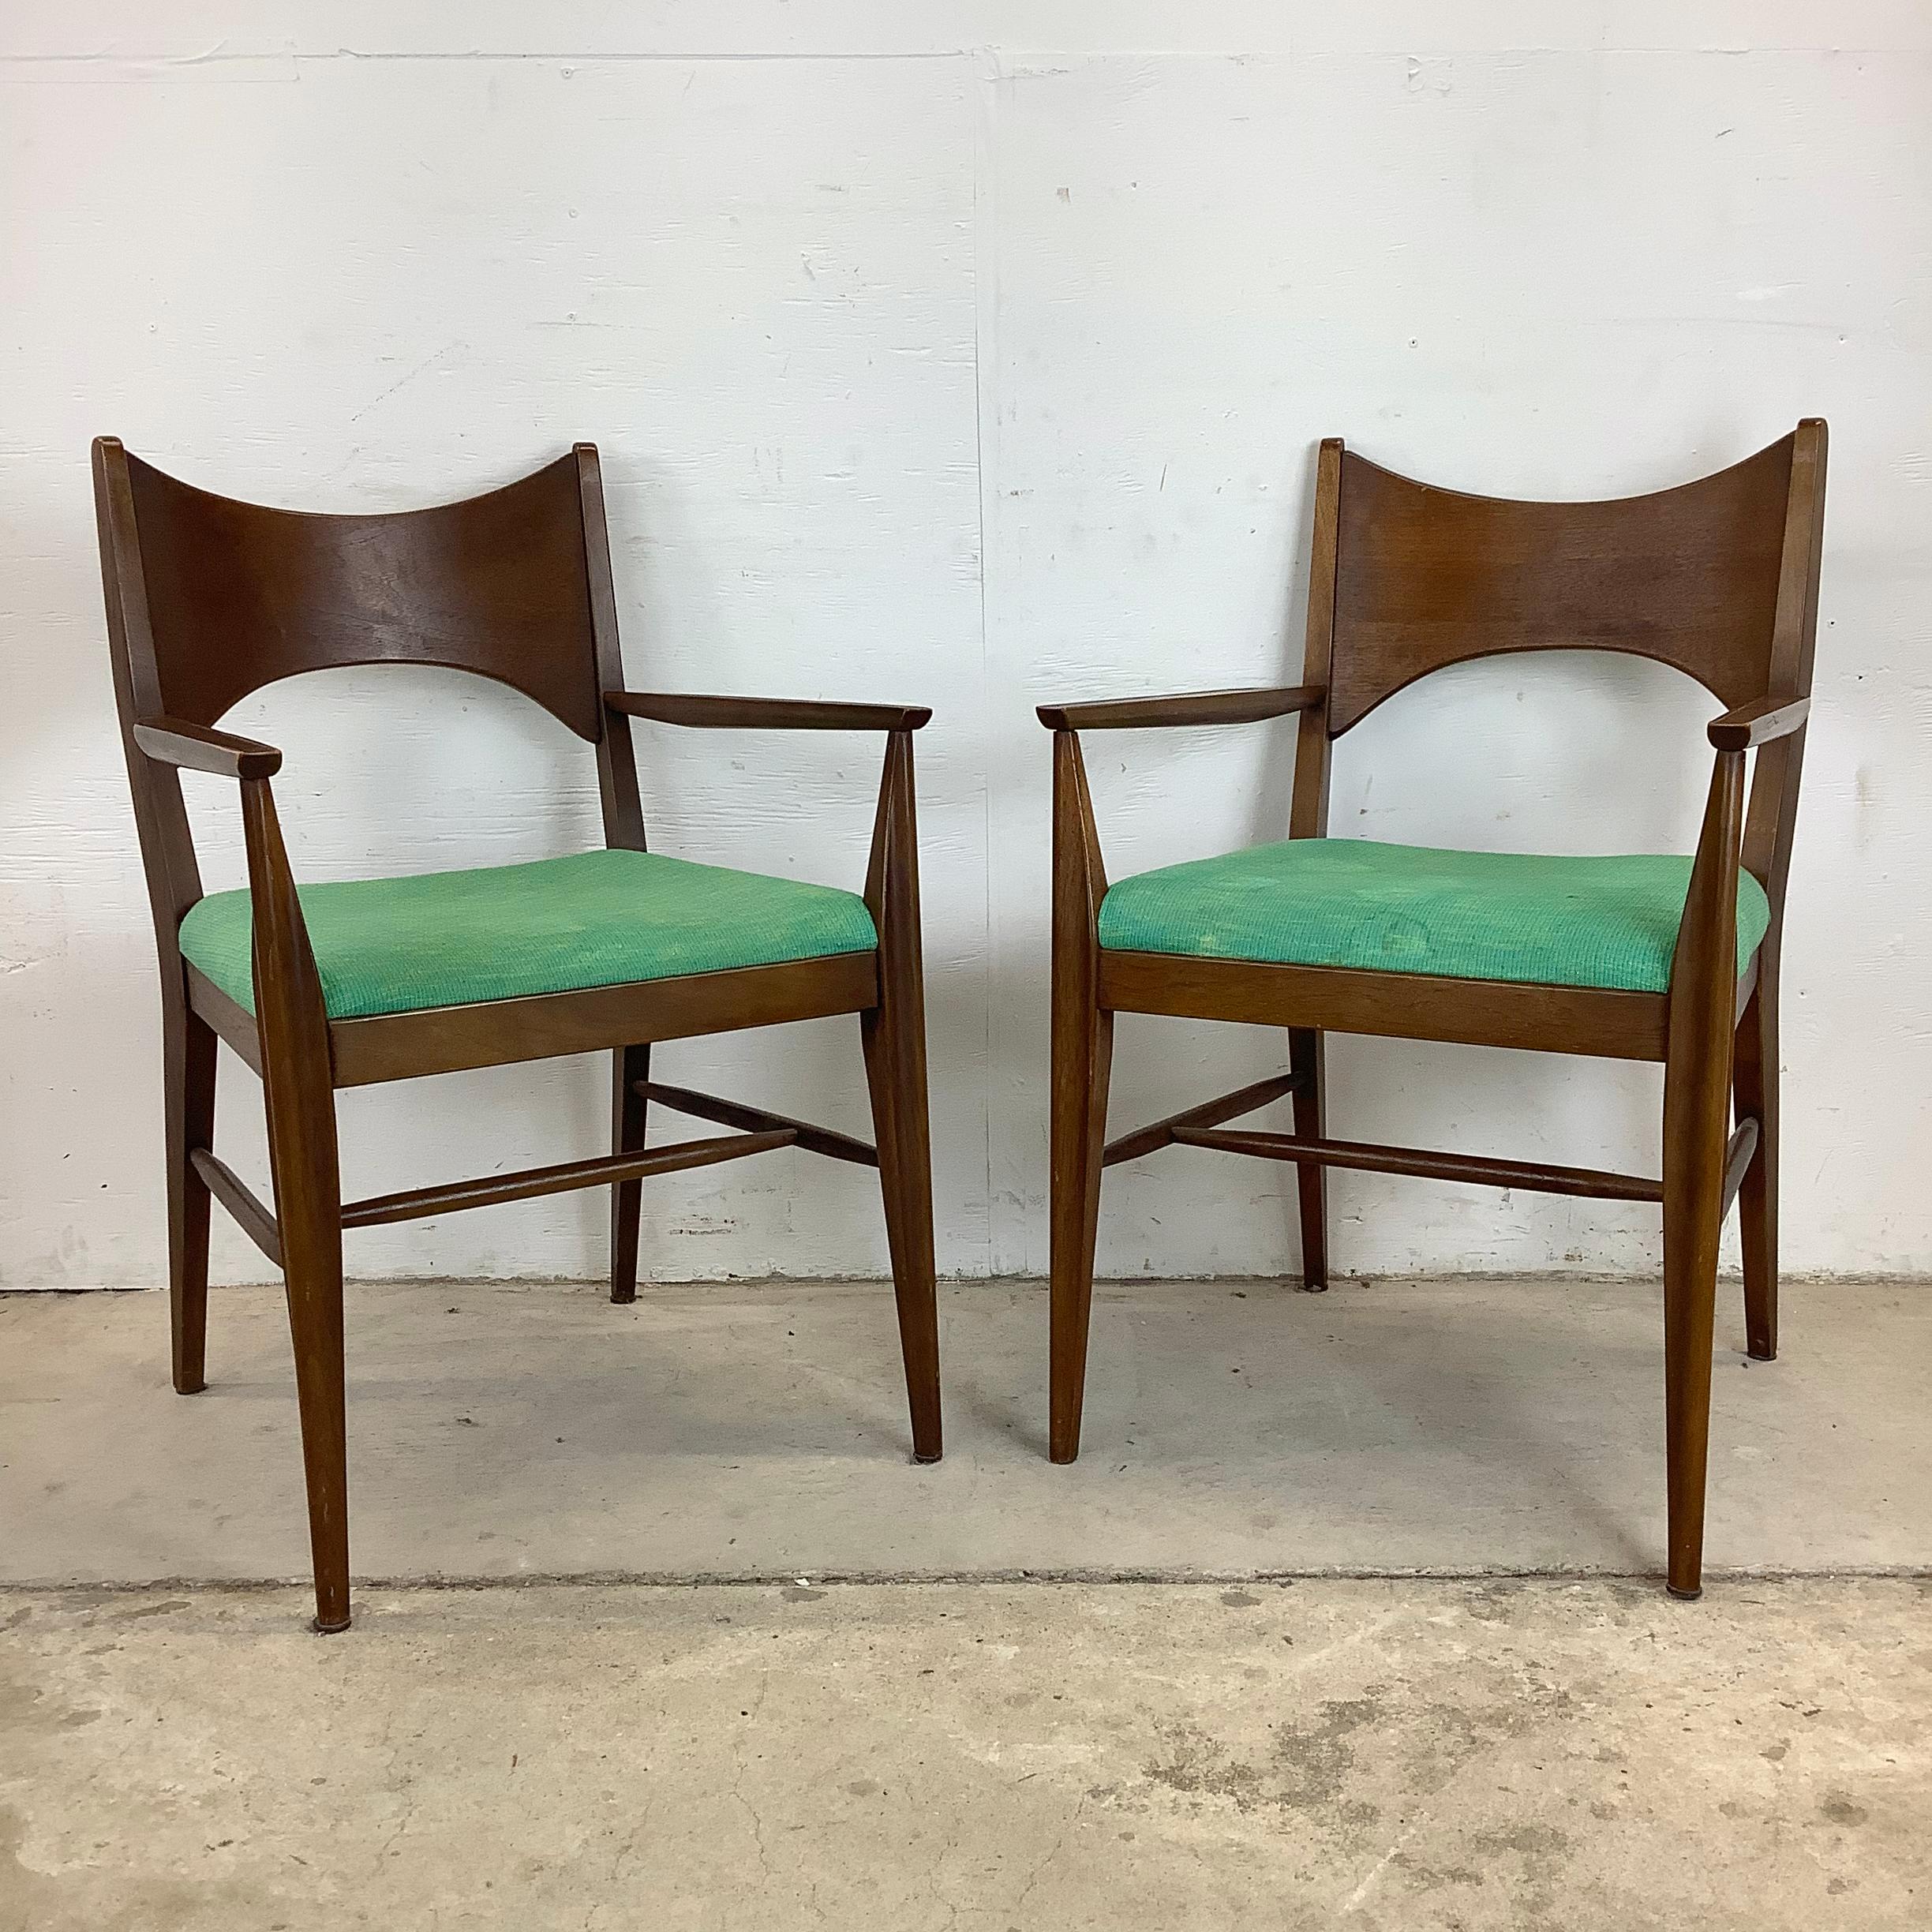 Introducing this striking set of mid-century Broyhill Saga Dining Chairs – a timeless blend of style, comfort, and quality. Crafted with exquisite attention to detail, these chairs boast the iconic design and quality craftsmanship synonymous with